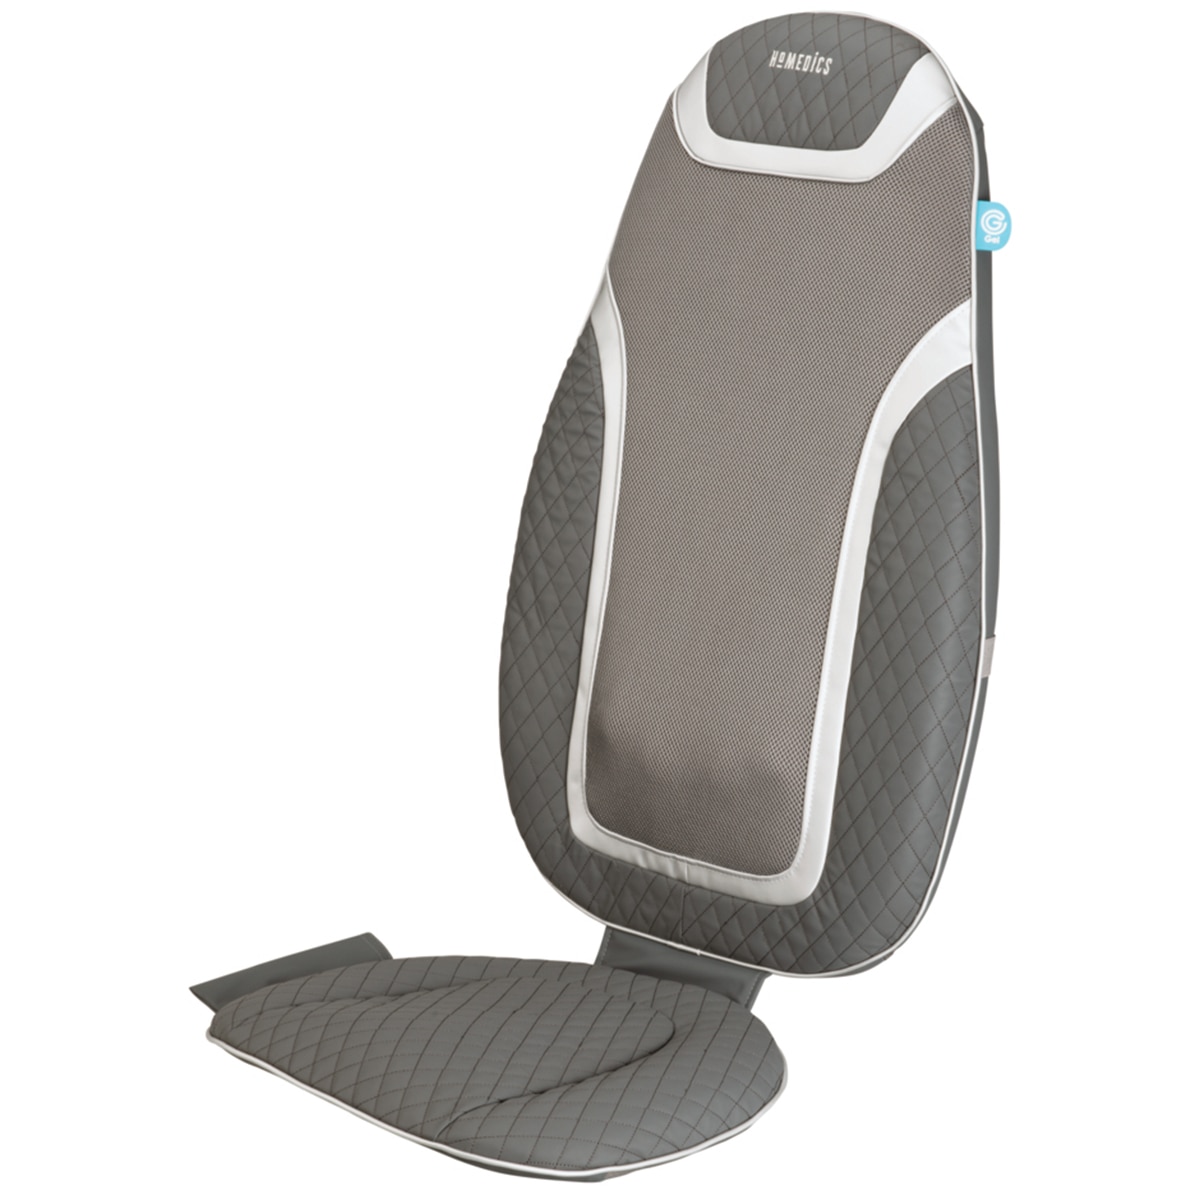 Homedics Gentle Touch Gel Deluxe Massage Cushion with Soothing Heat